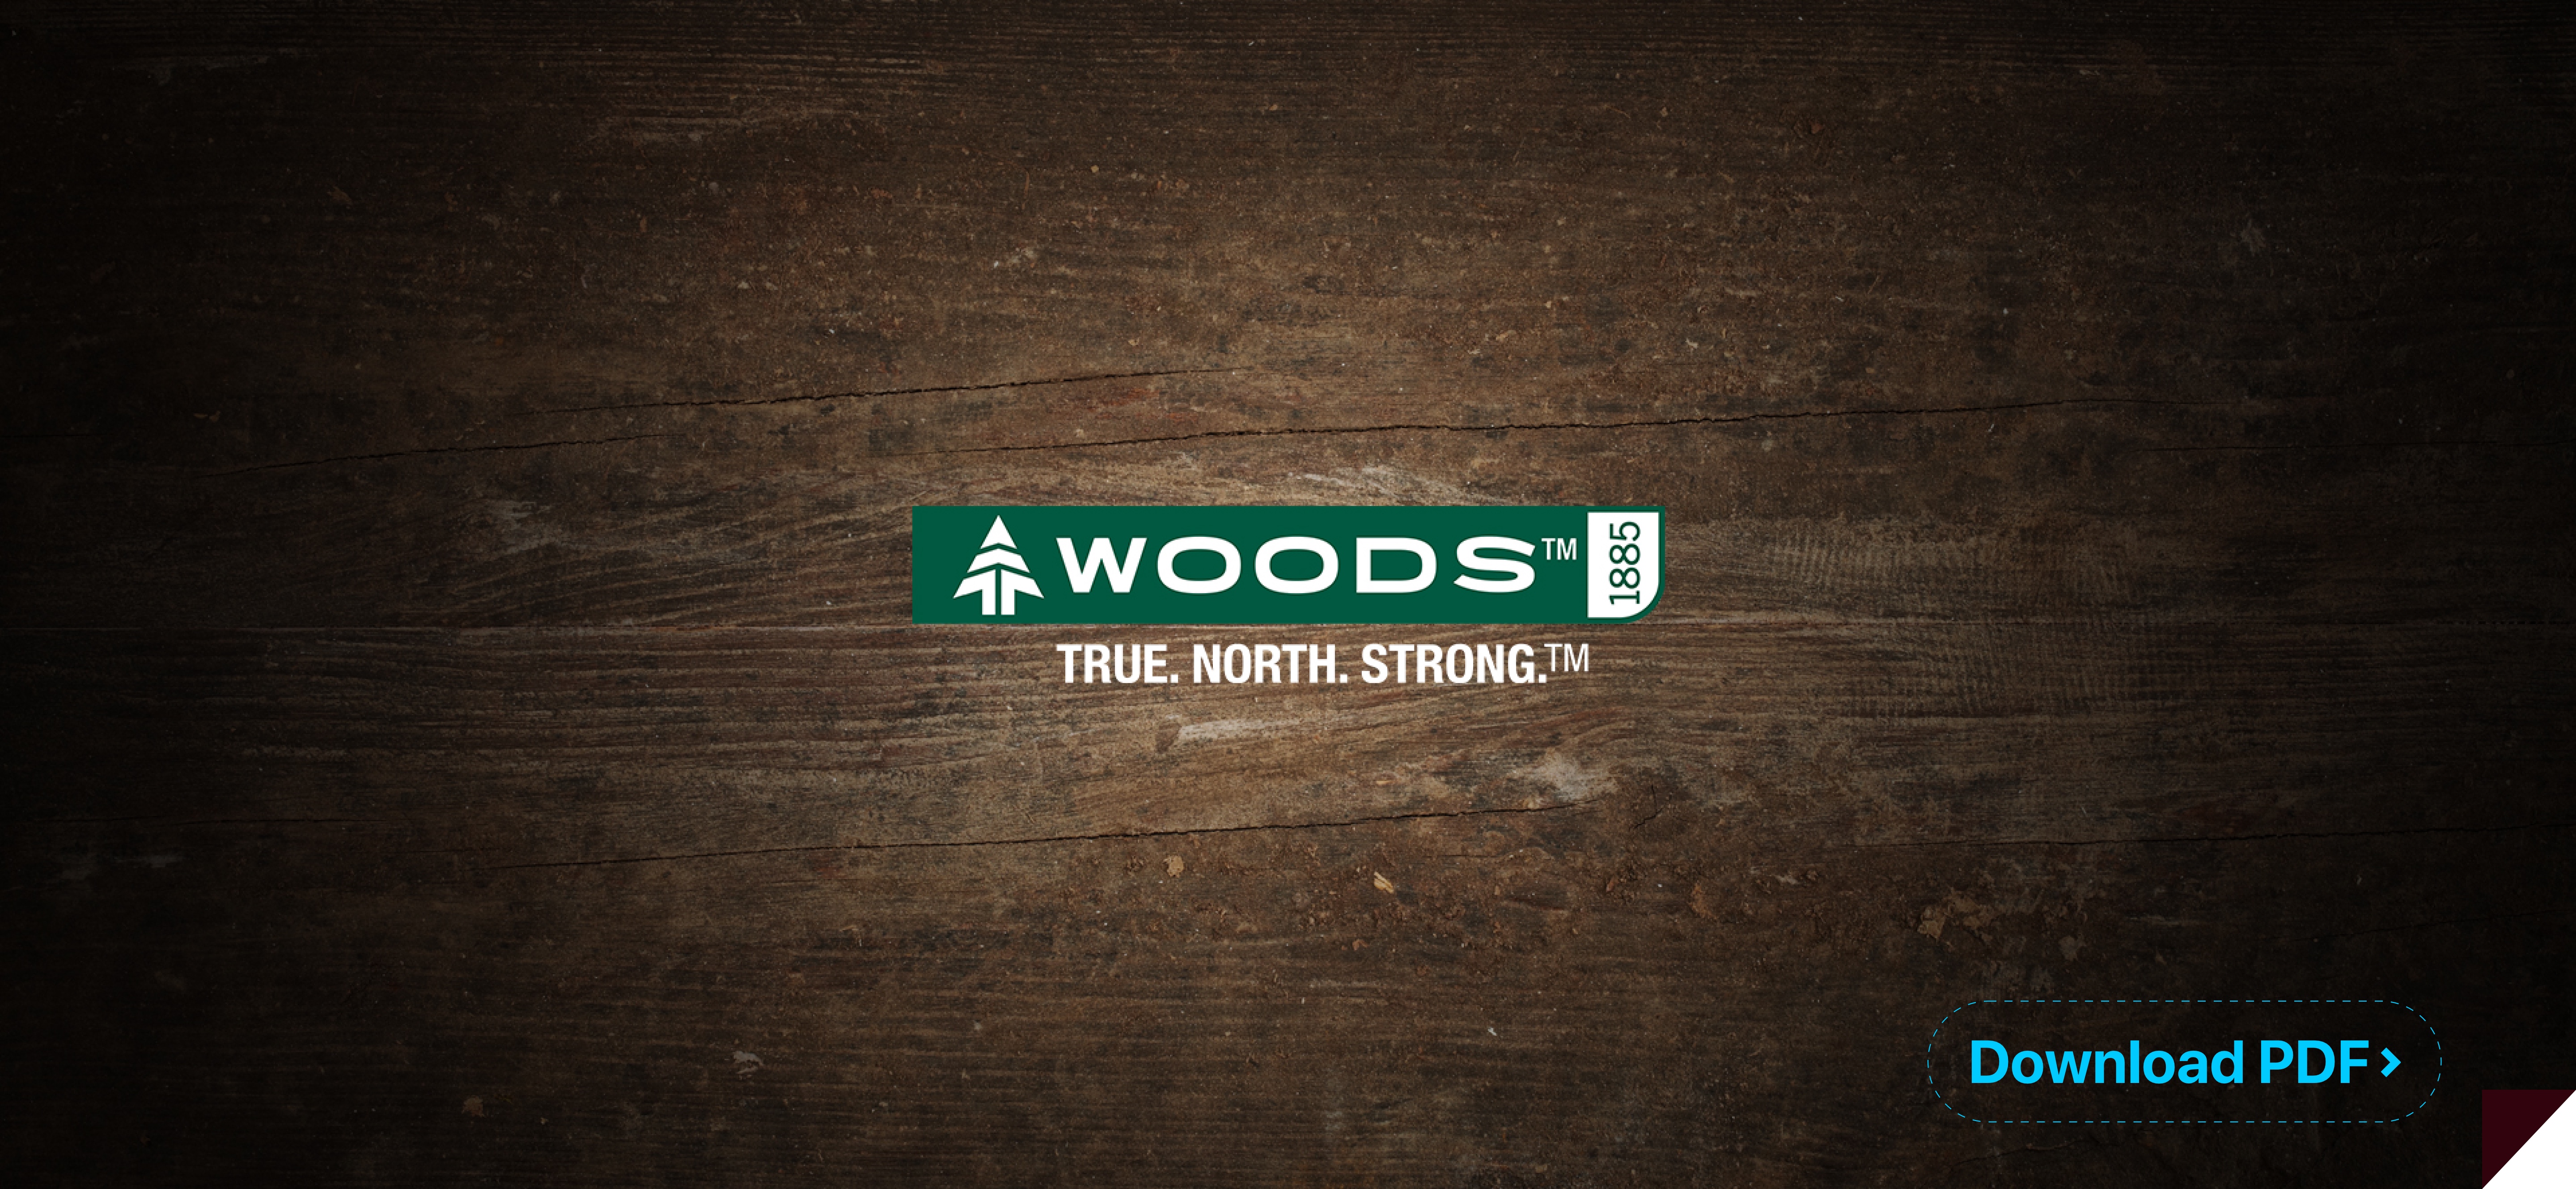 Woods Canada UX by Moera Creative